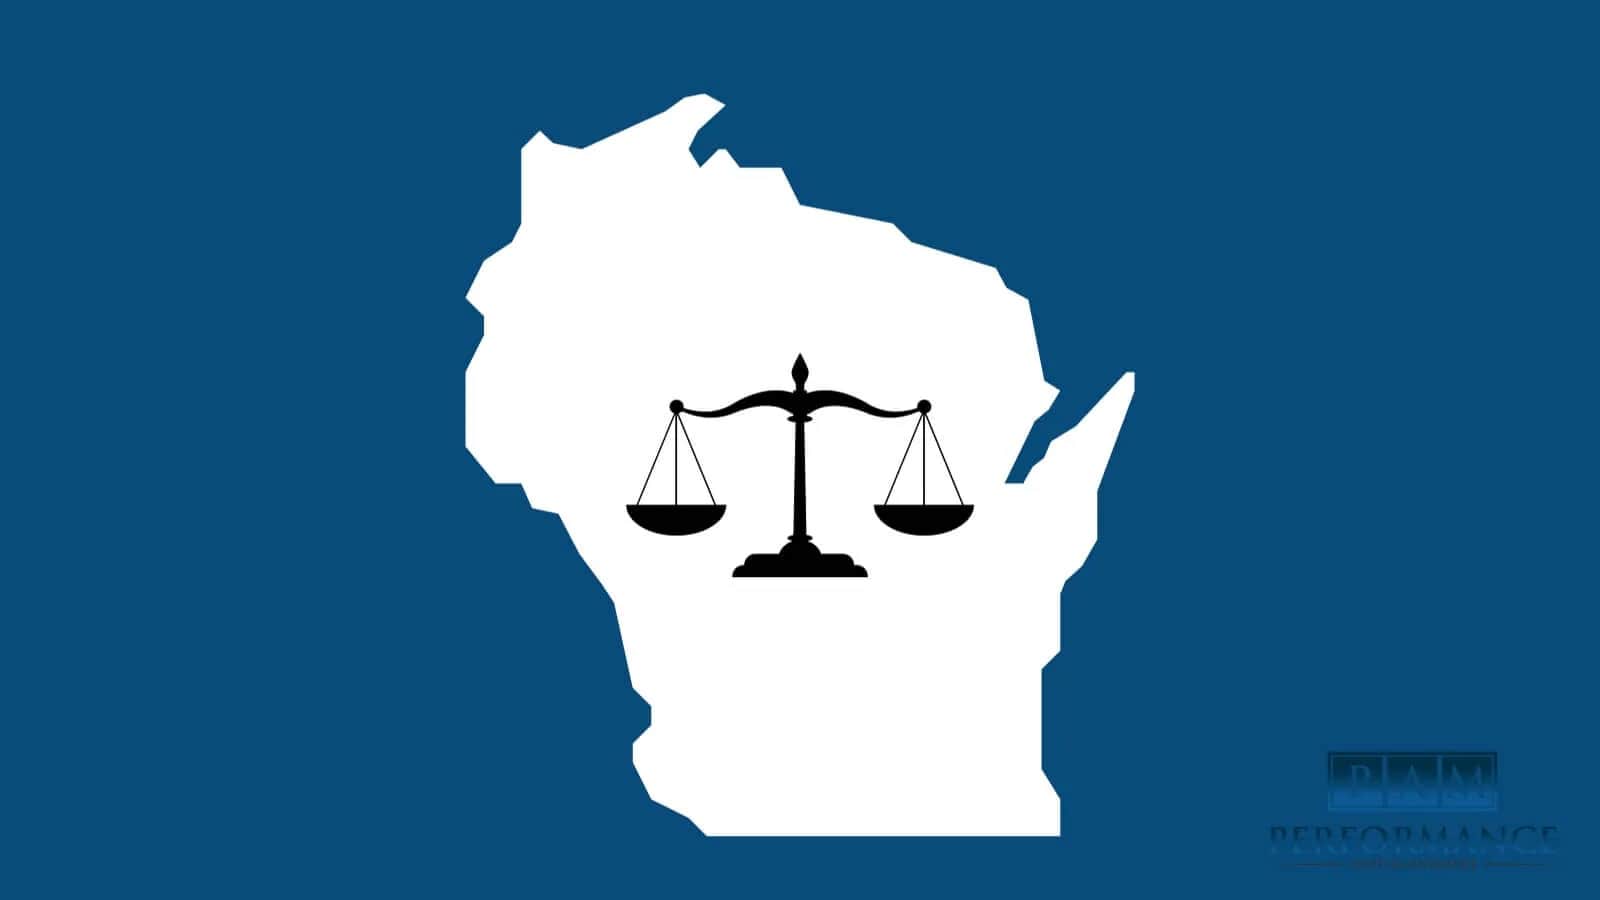 COMPREHENSIVE GUIDE FOR NAVIGATING WISCONSIN INVESTOR-RESIDENT LAWS